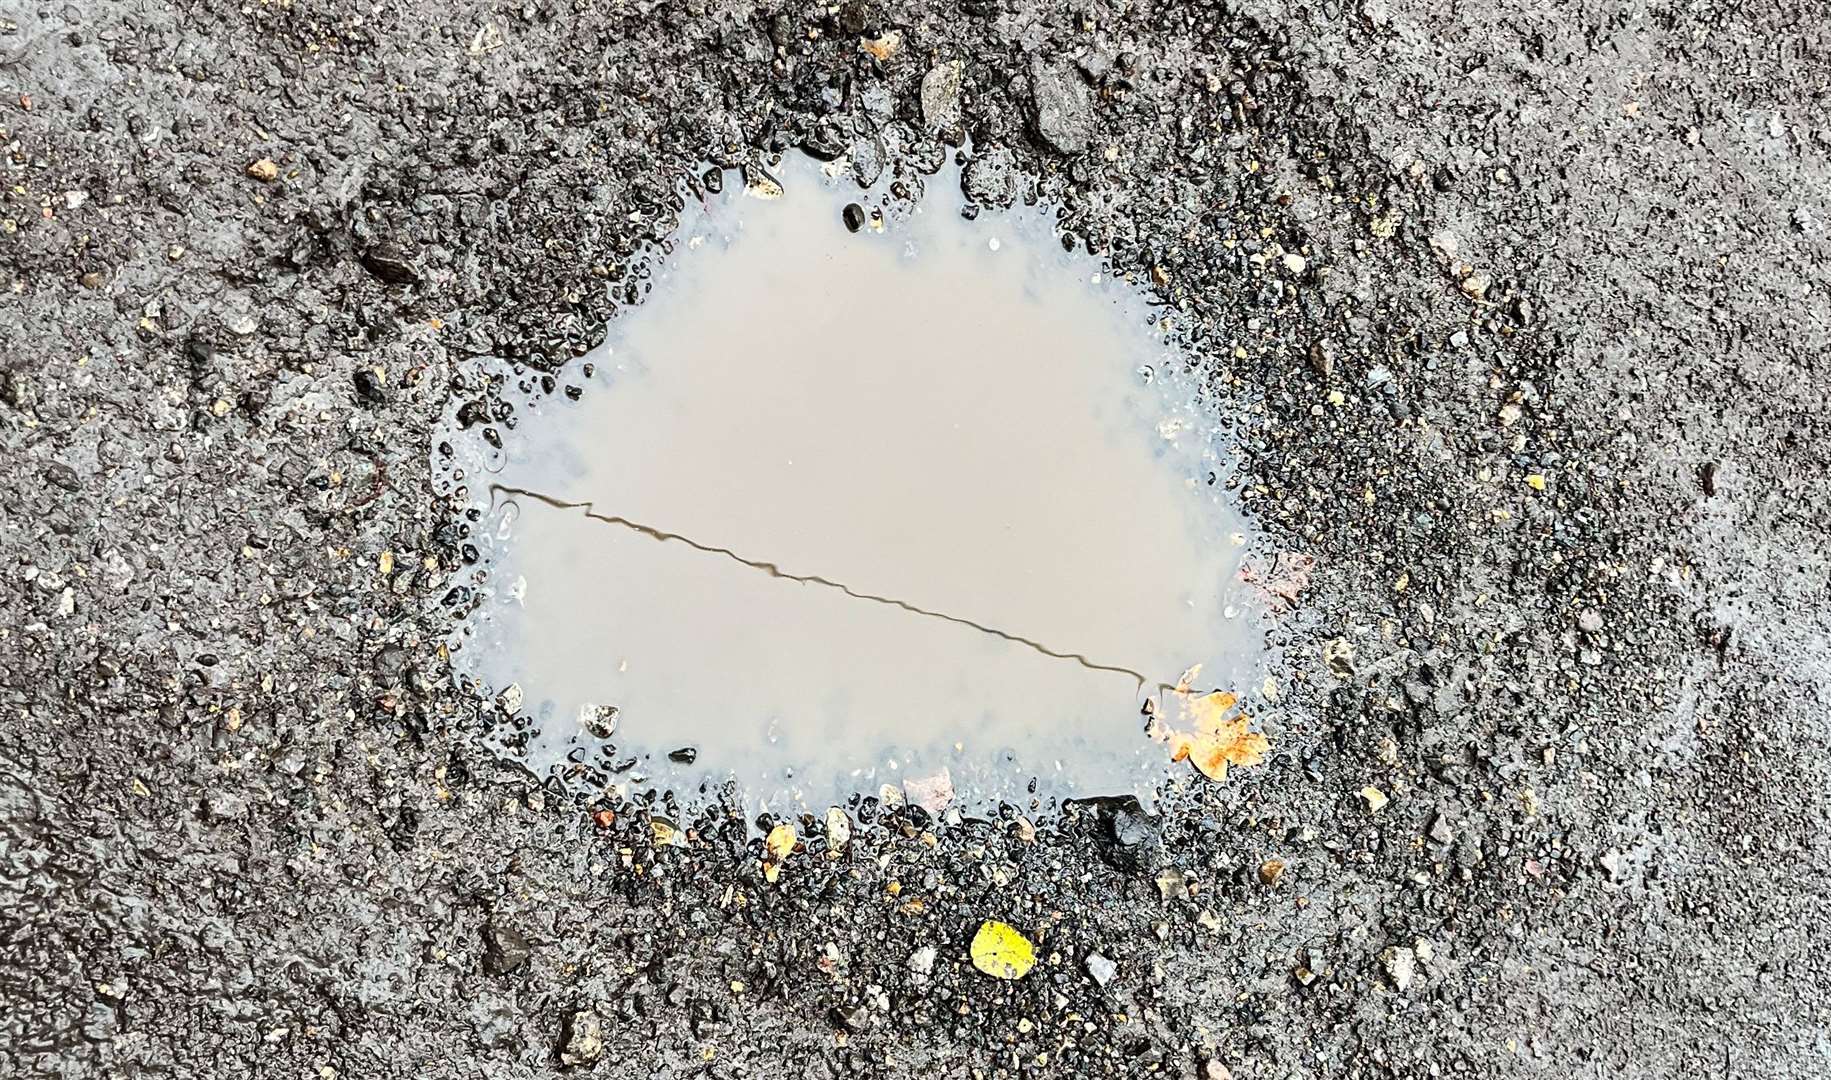 There are said to be around 100 potholes in Bockhanger Lane in Ashford